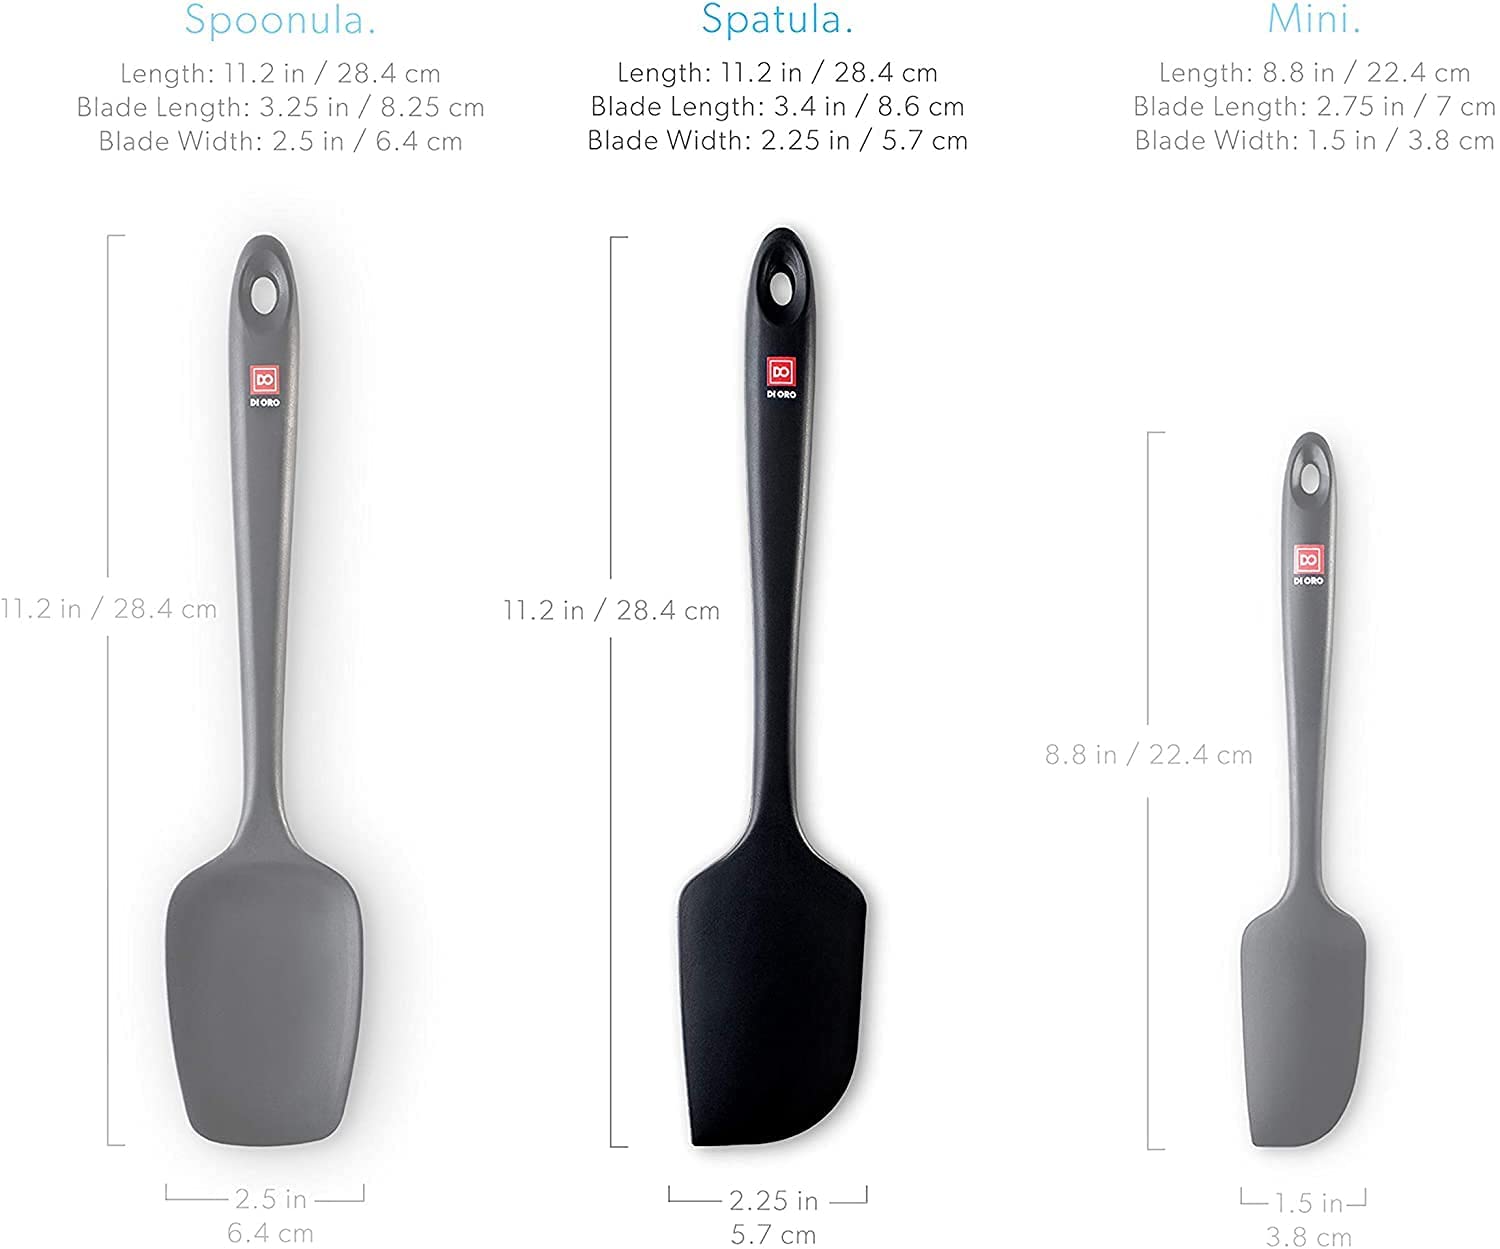 DI ORO Silicone Spatula - 600°F Heat-Resistant Rubber Kitchen Spatula for Baking, Scraping, & Mixing - BPA Free Nonstick Cookware Safe Flexible Utensil for Cooking - Seamless & Dishwasher Safe (Black)